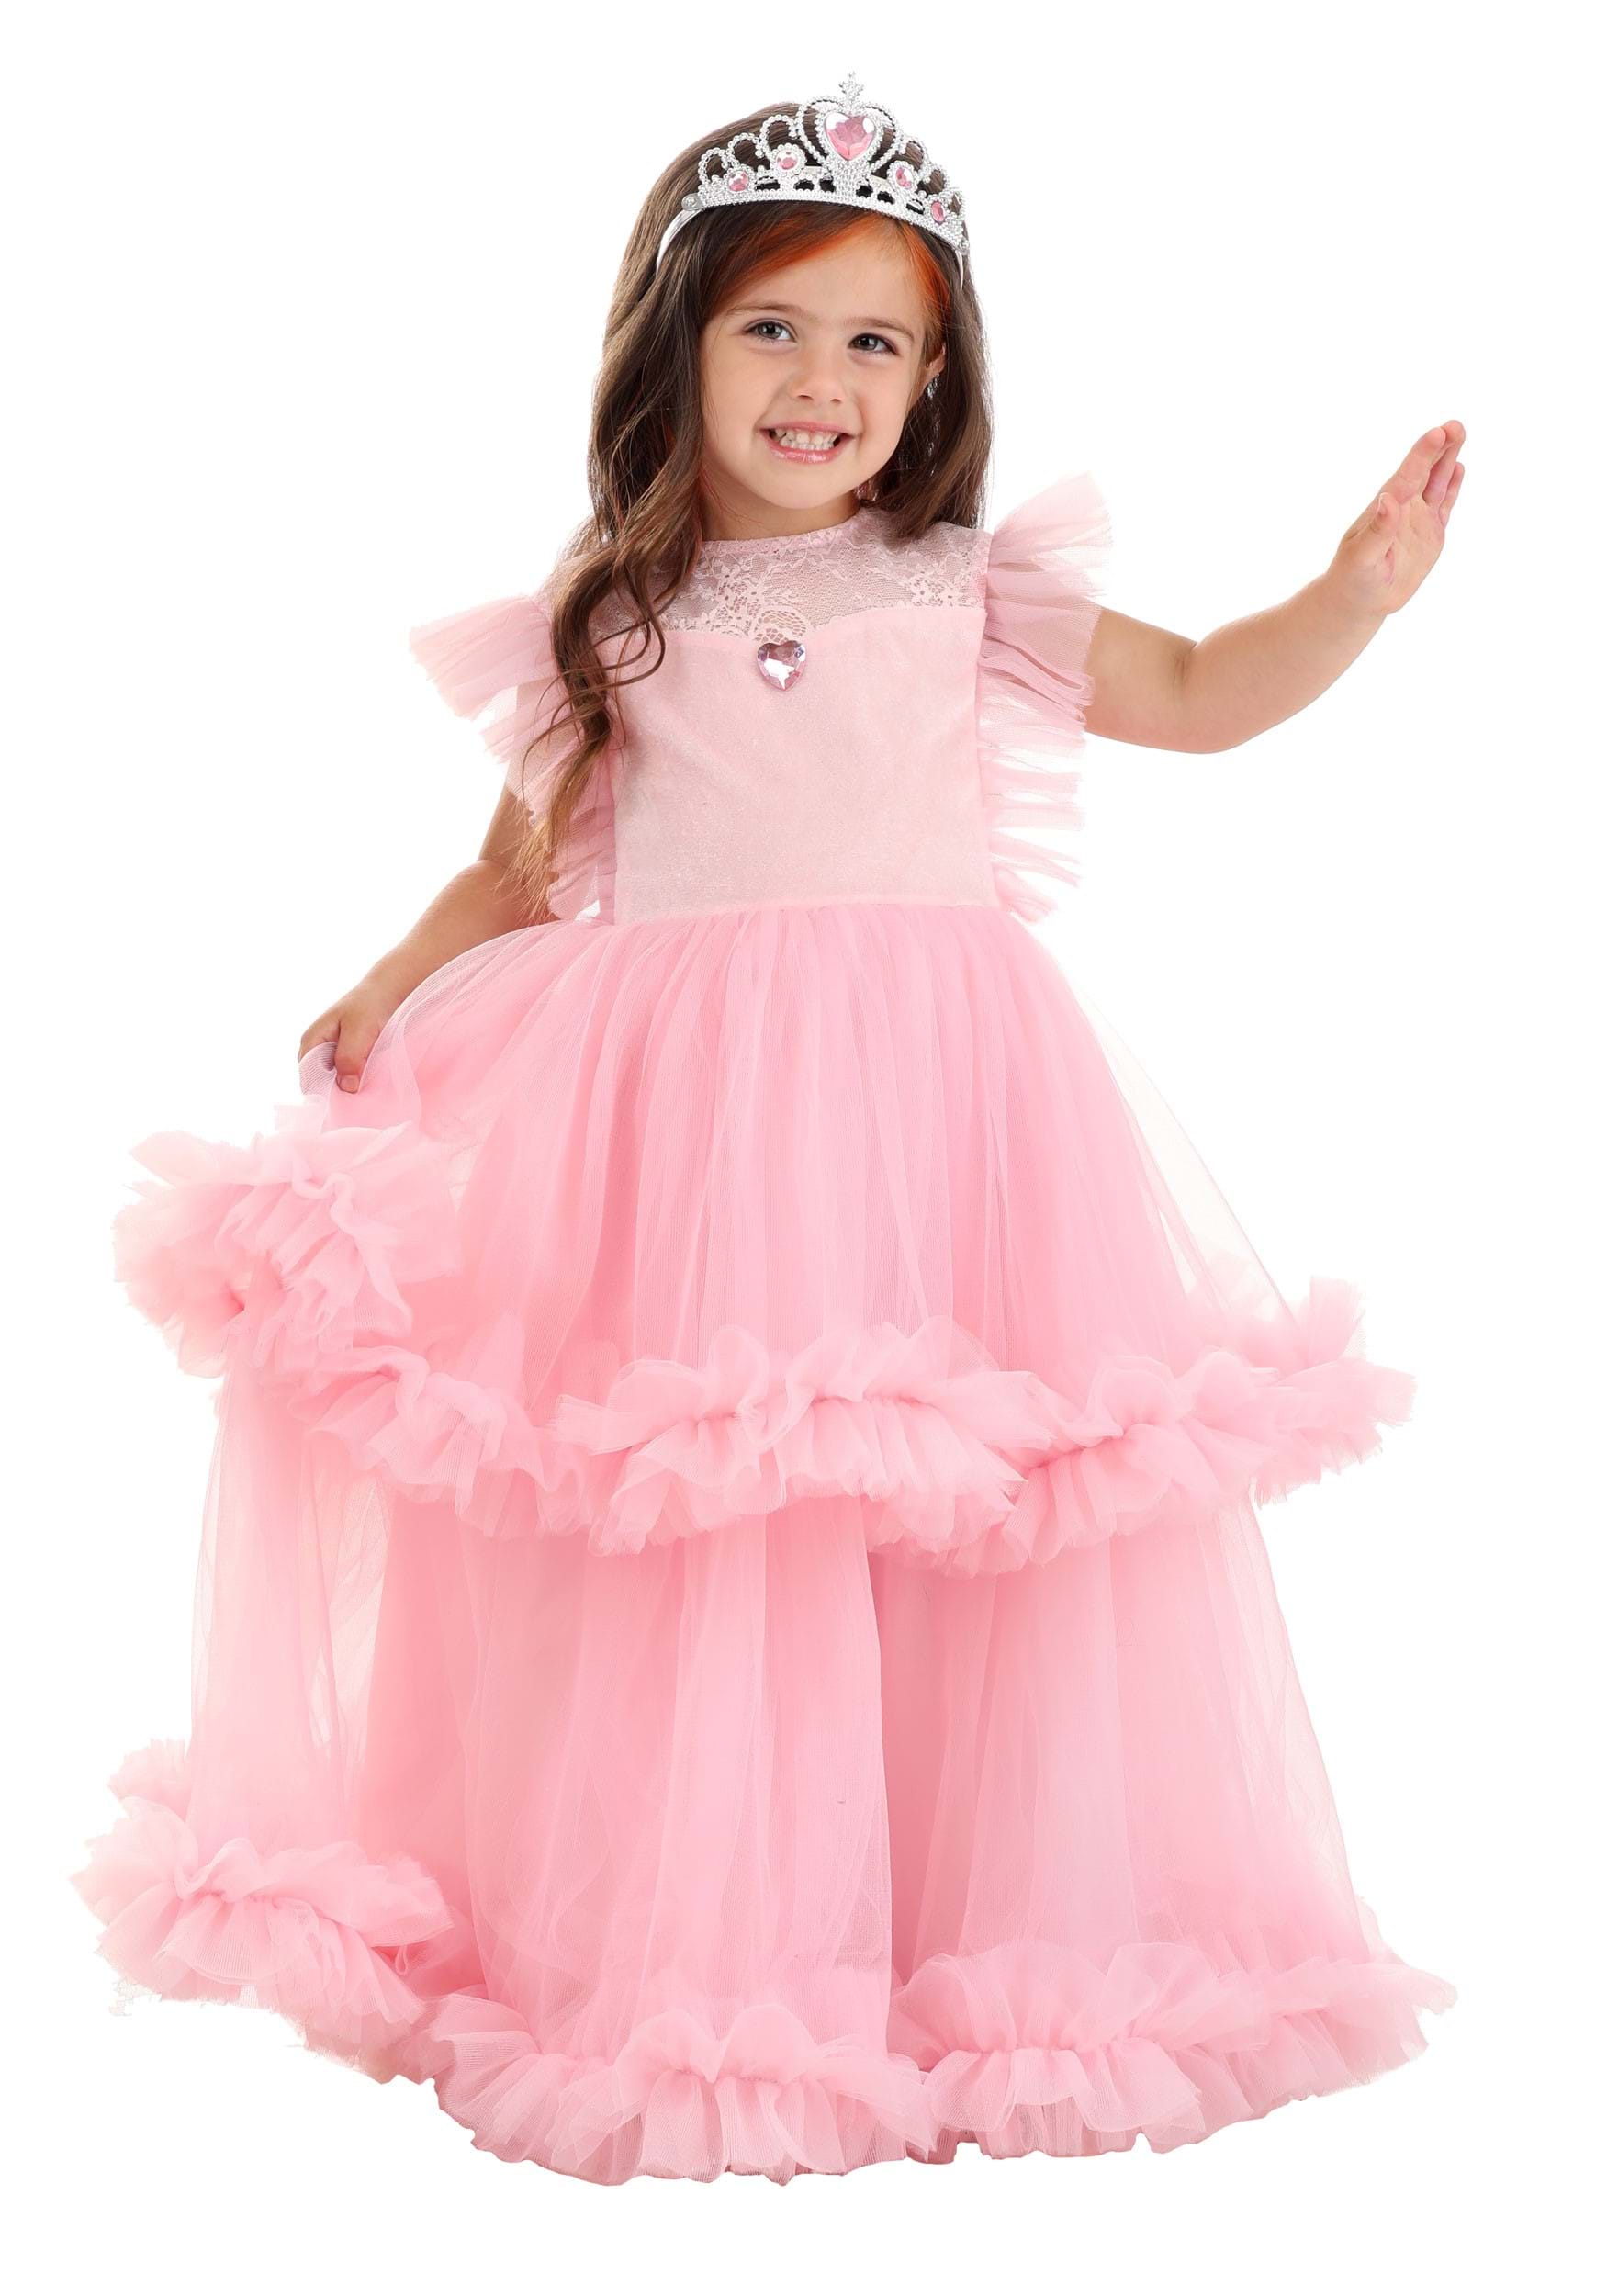 https://images.halloweencostumes.com/products/87028/1-1/toddler-pretty-in-pink-princess-costume-dress.jpg